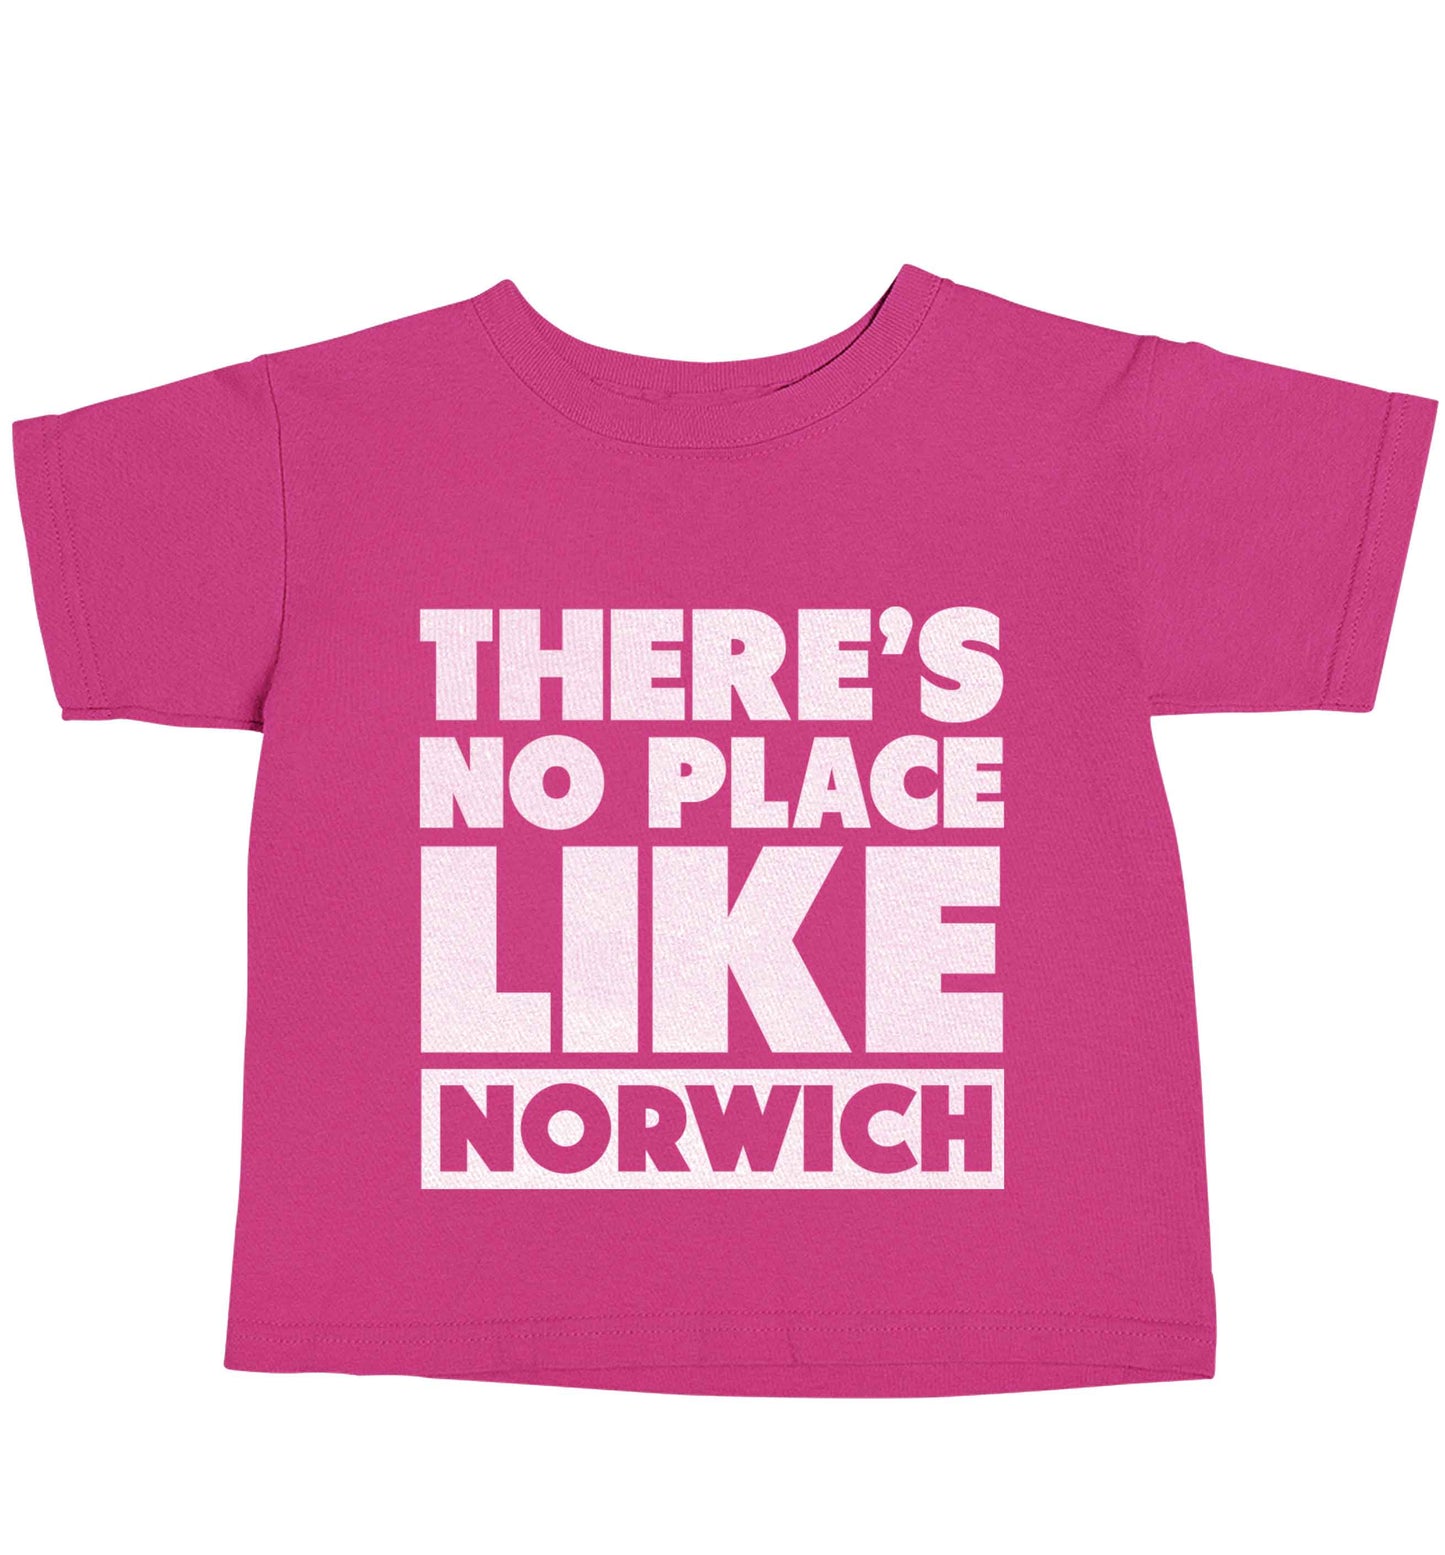 There's no place like Norwich pink baby toddler Tshirt 2 Years